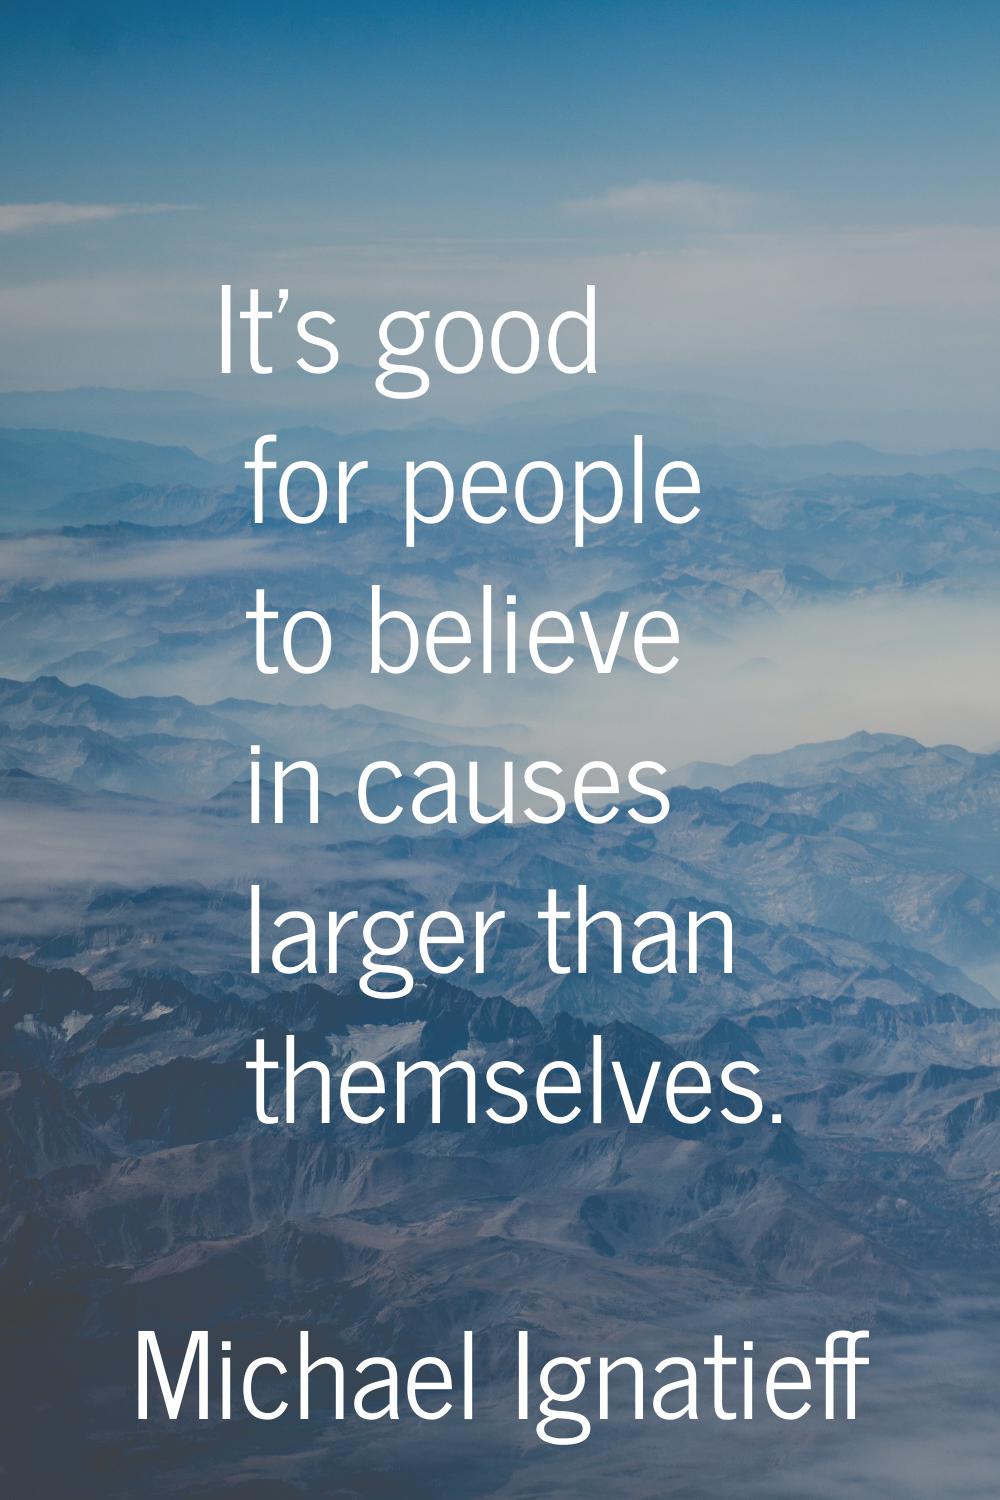 It's good for people to believe in causes larger than themselves.